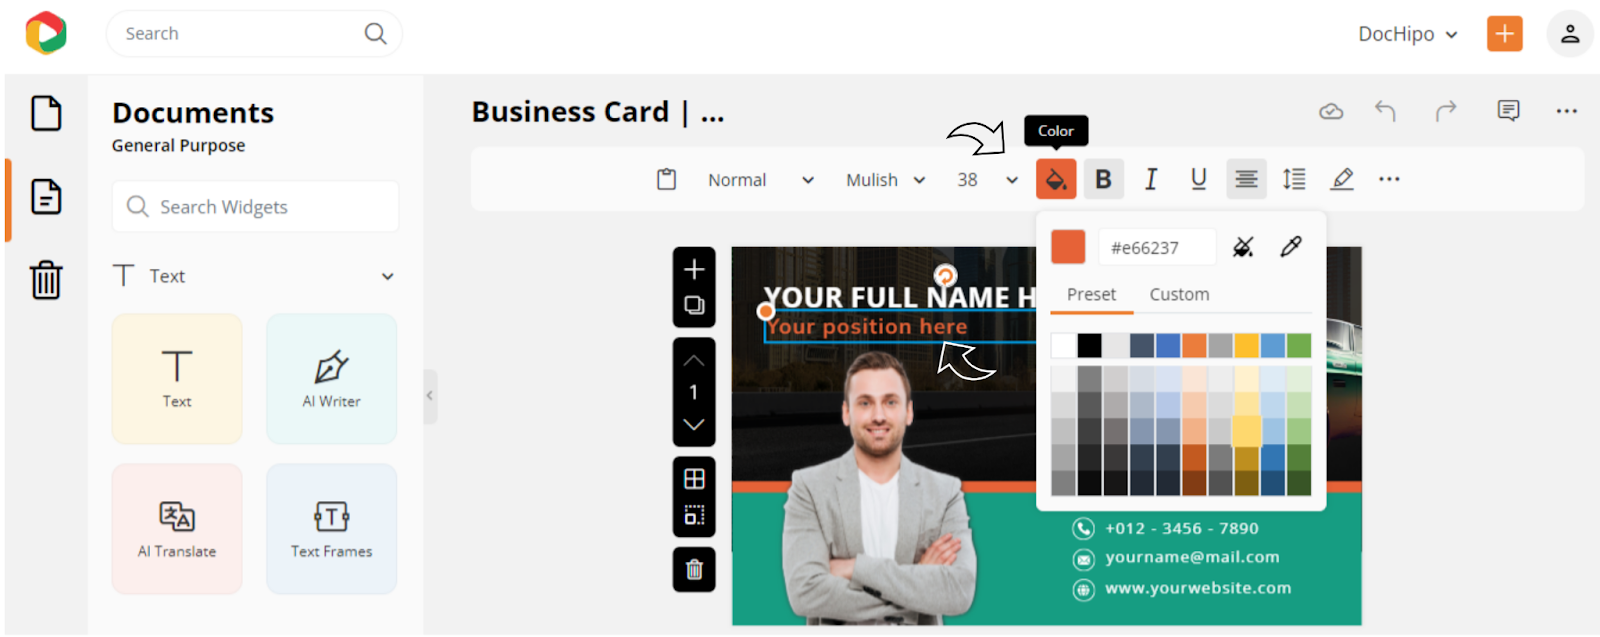 Customize Business Card Templates from DocHipo Editor